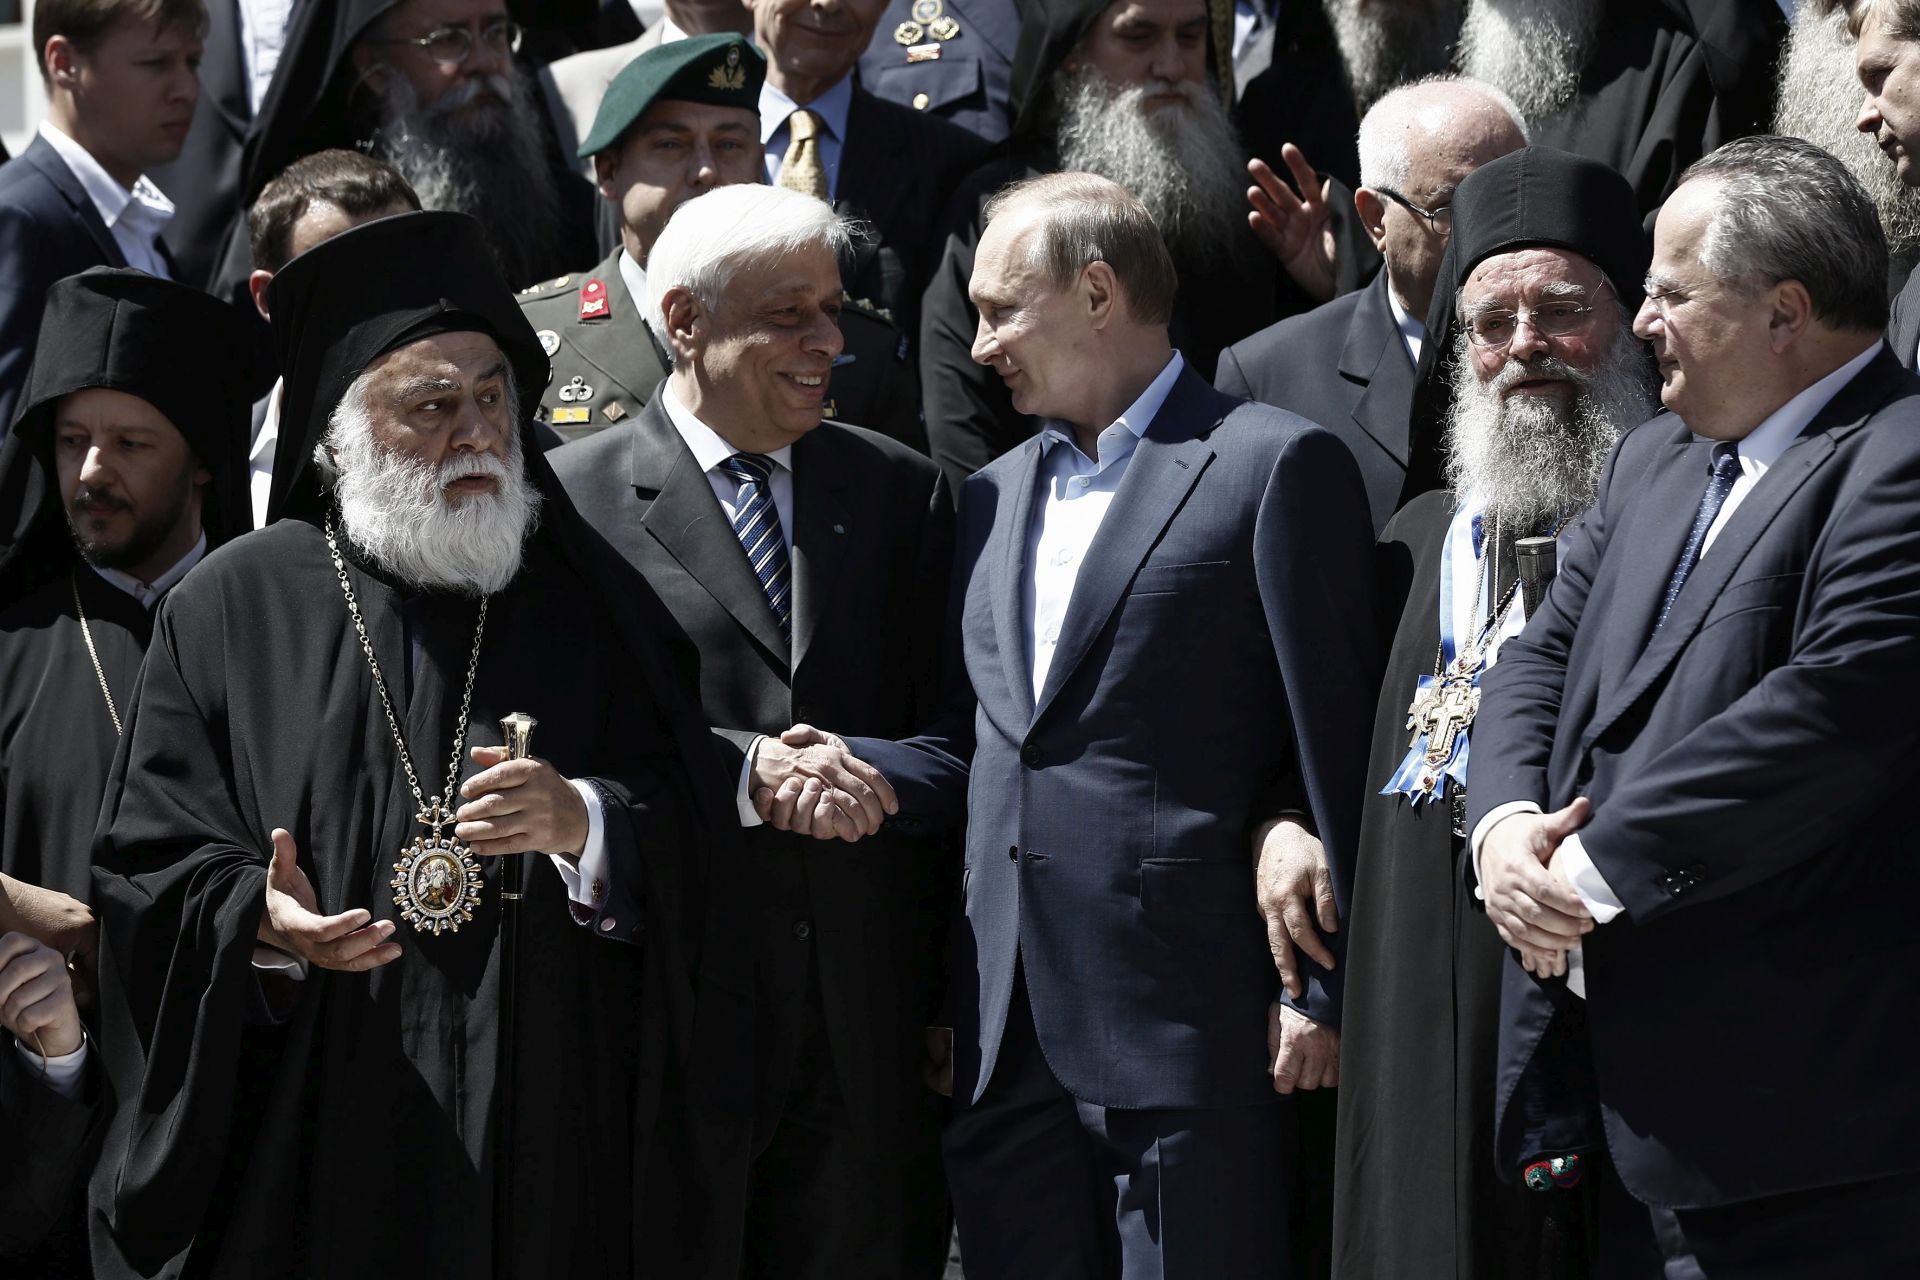 epa05333661 Russian President Vladimir Putin (C) is shakes hands with Greek President Prokopis Pavlopoulos (C-L) next to Greek Foreign Minister Nikos Kotzias (R) during their visit in Mount Athos, in northern Greece, 28 May 2016. The Russian President is in Greece on a two-day official visit.  EPA/YANNIS KOLESIDIS